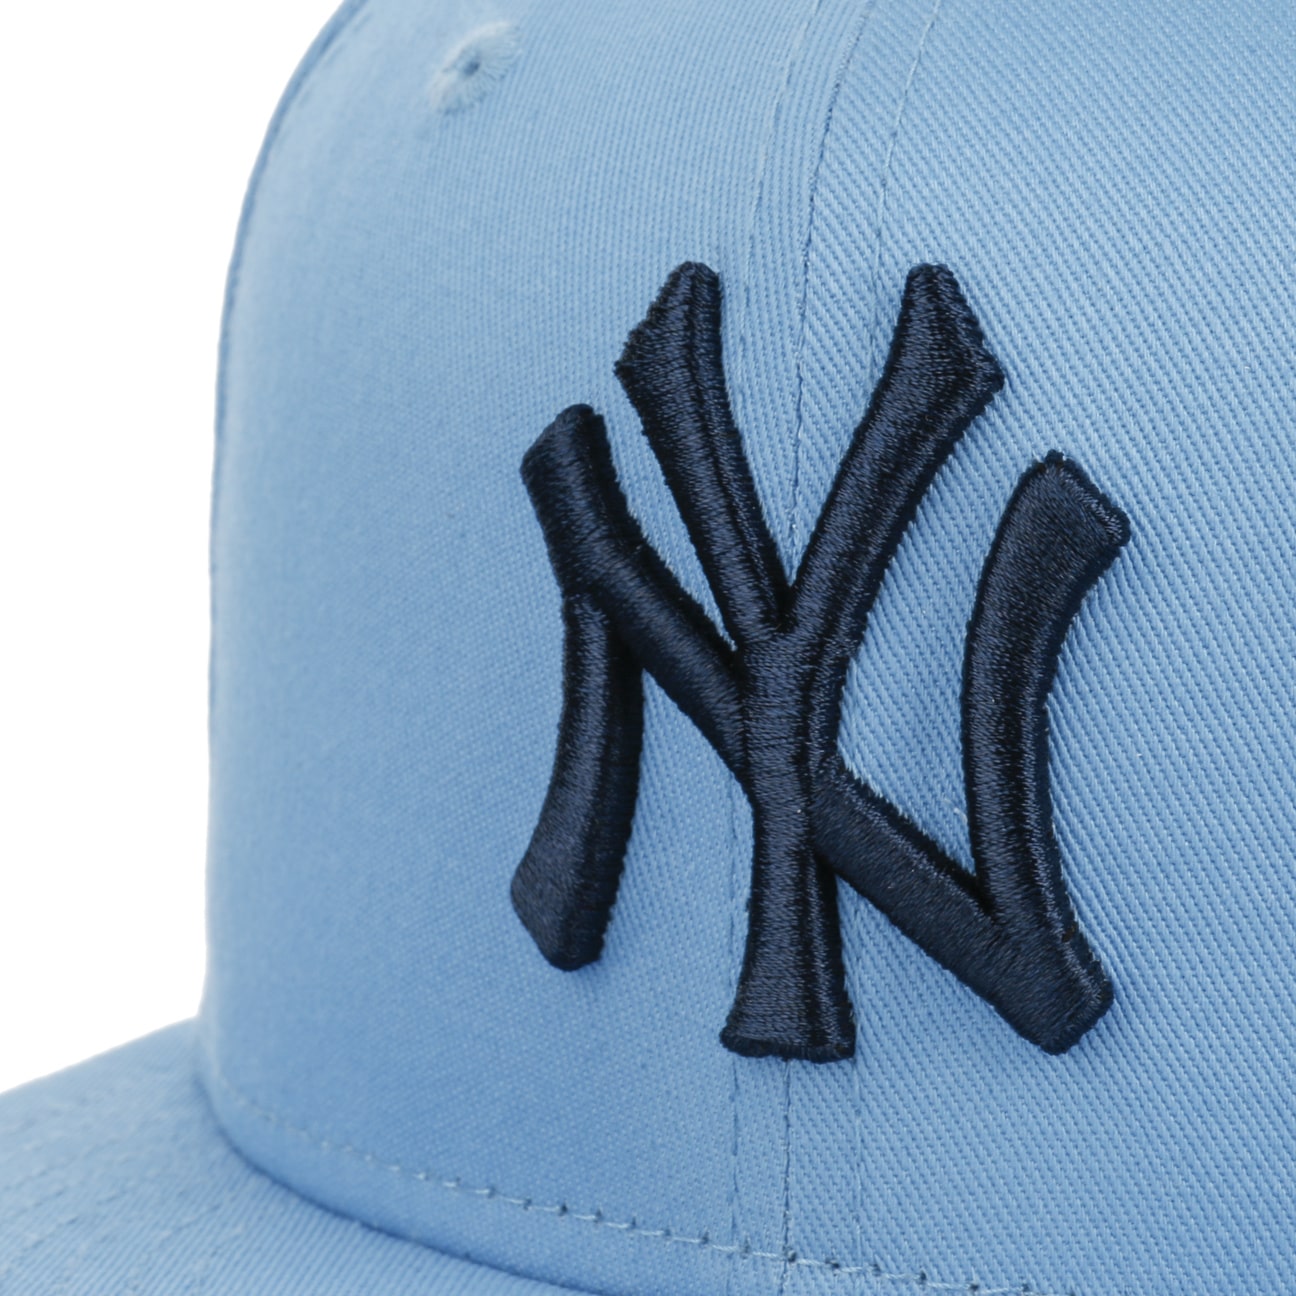 New Era Cap MLB NY Yankees Black, White 59FIFTY Fitted Hat